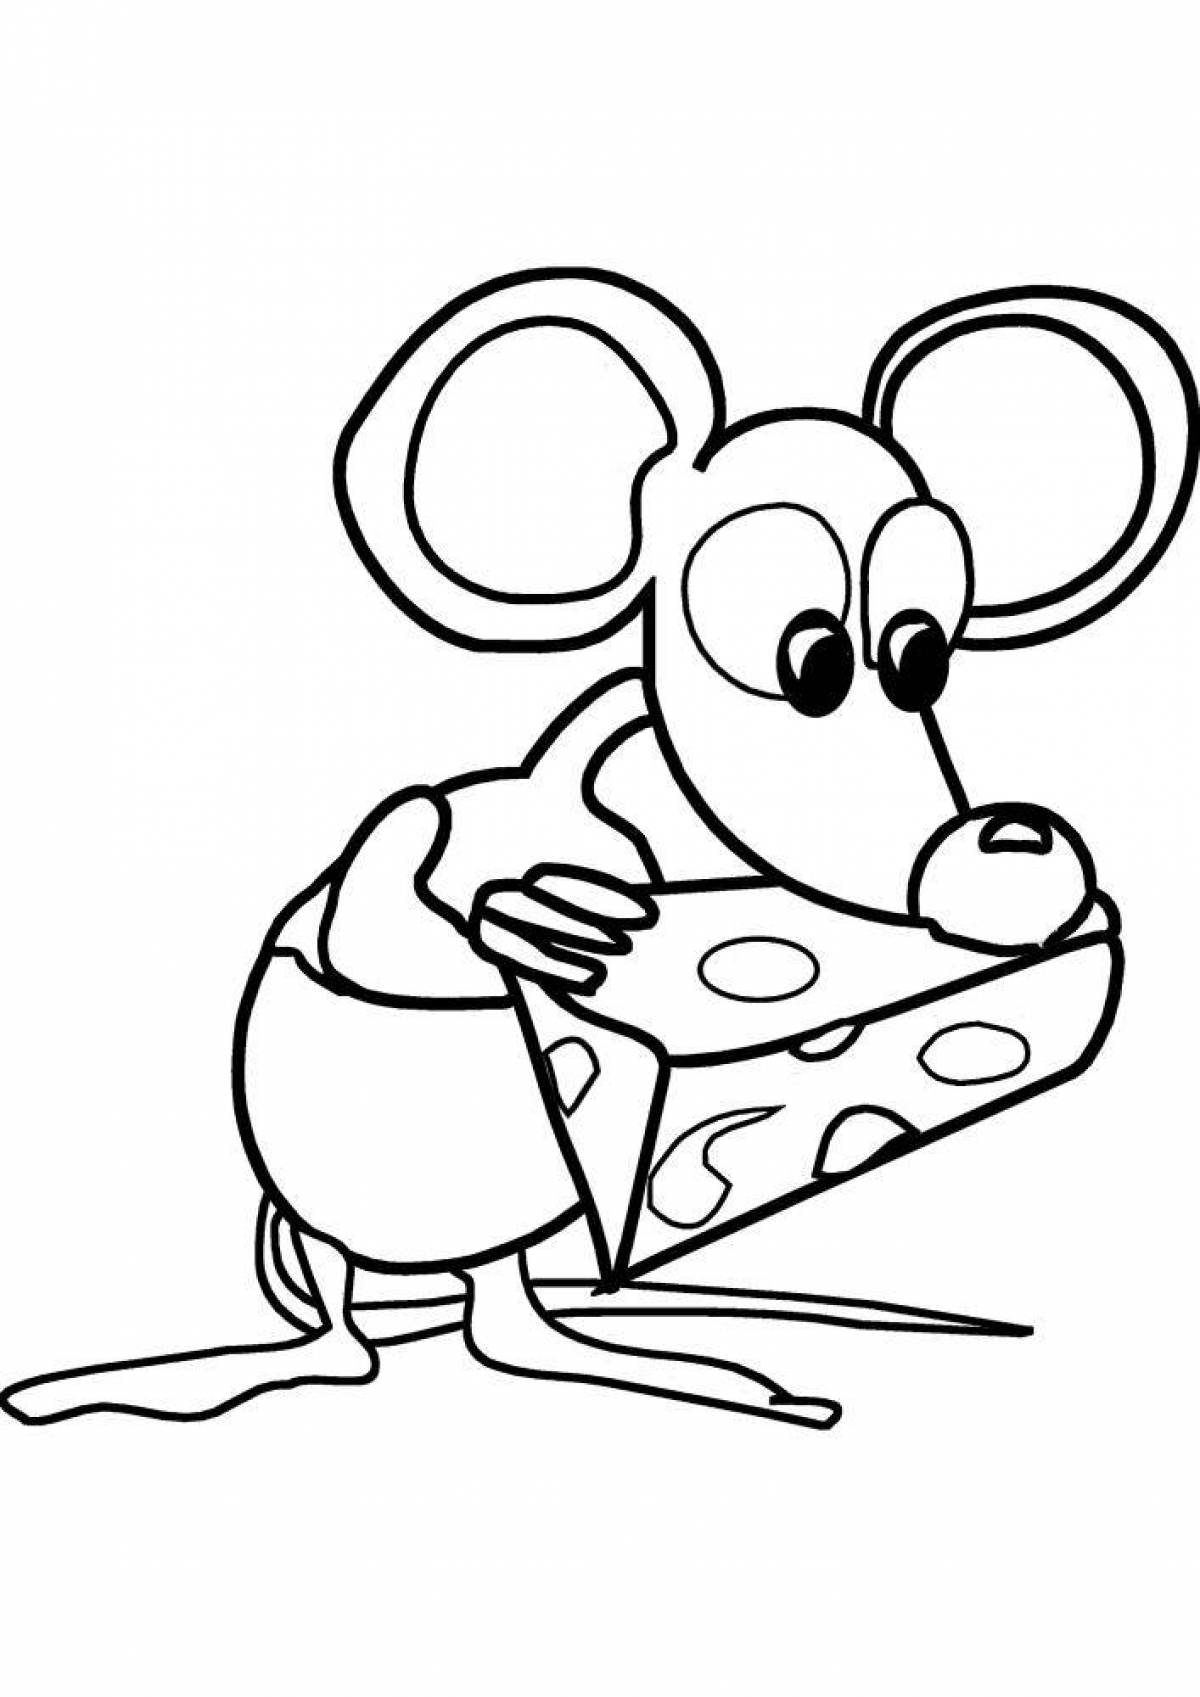 Violent mouse with cheese coloring book